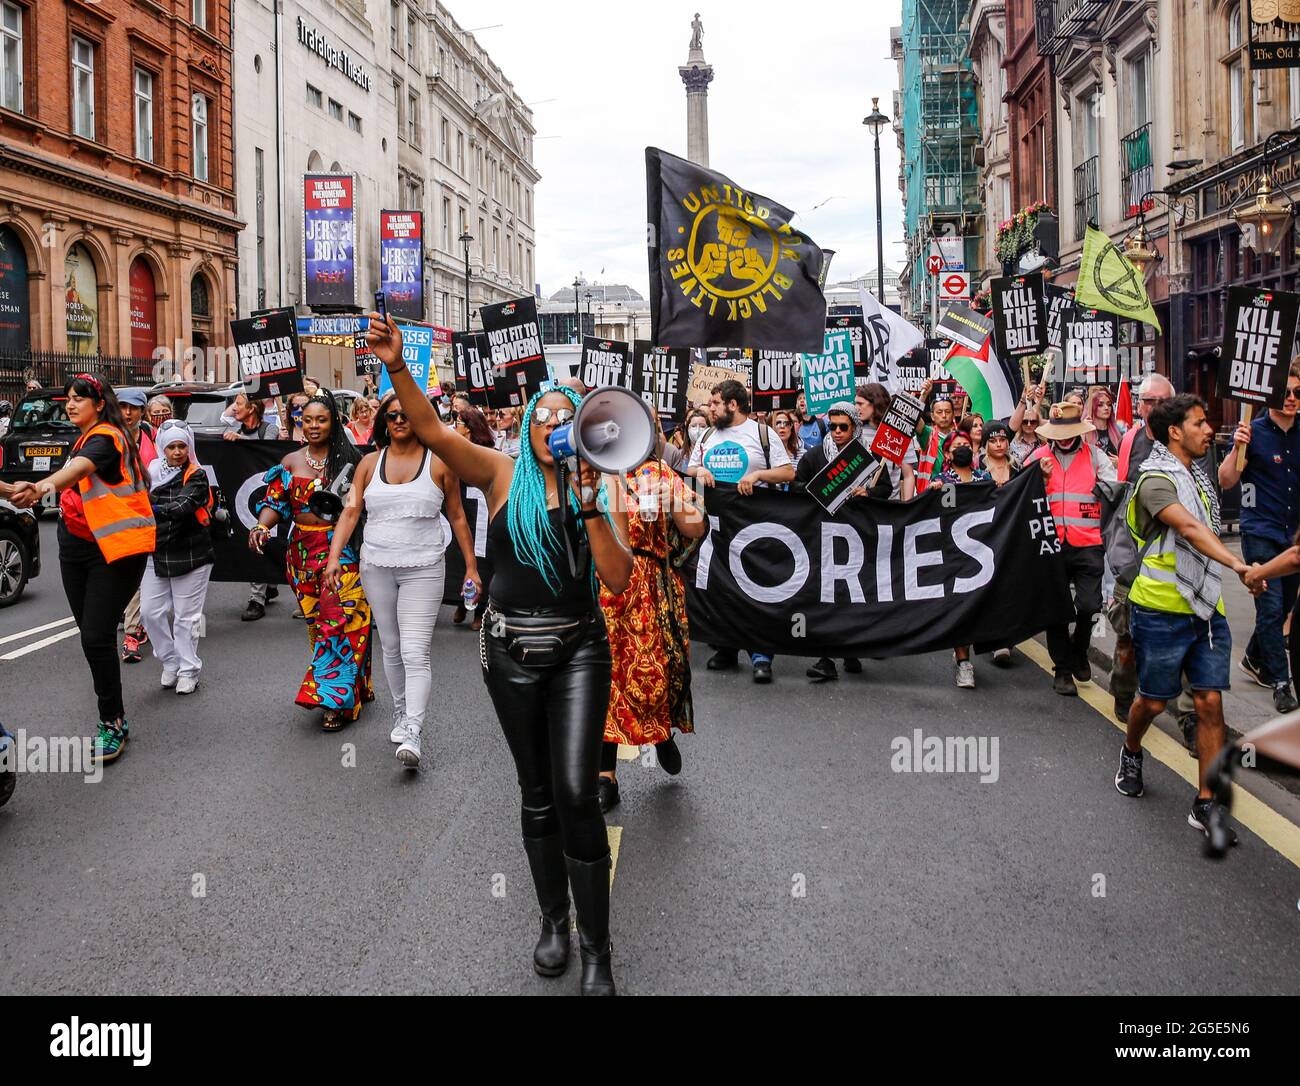 London,  UK on June 26, 2021: Anti-government activists  protest at Trafalgar Square. The protest unites activists from many opposition left wing movements such as Kill the Bill, The People's Assembly, NHS Staff Voices, Stop the War Coalition or Extintion Rebellion. Stock Photo